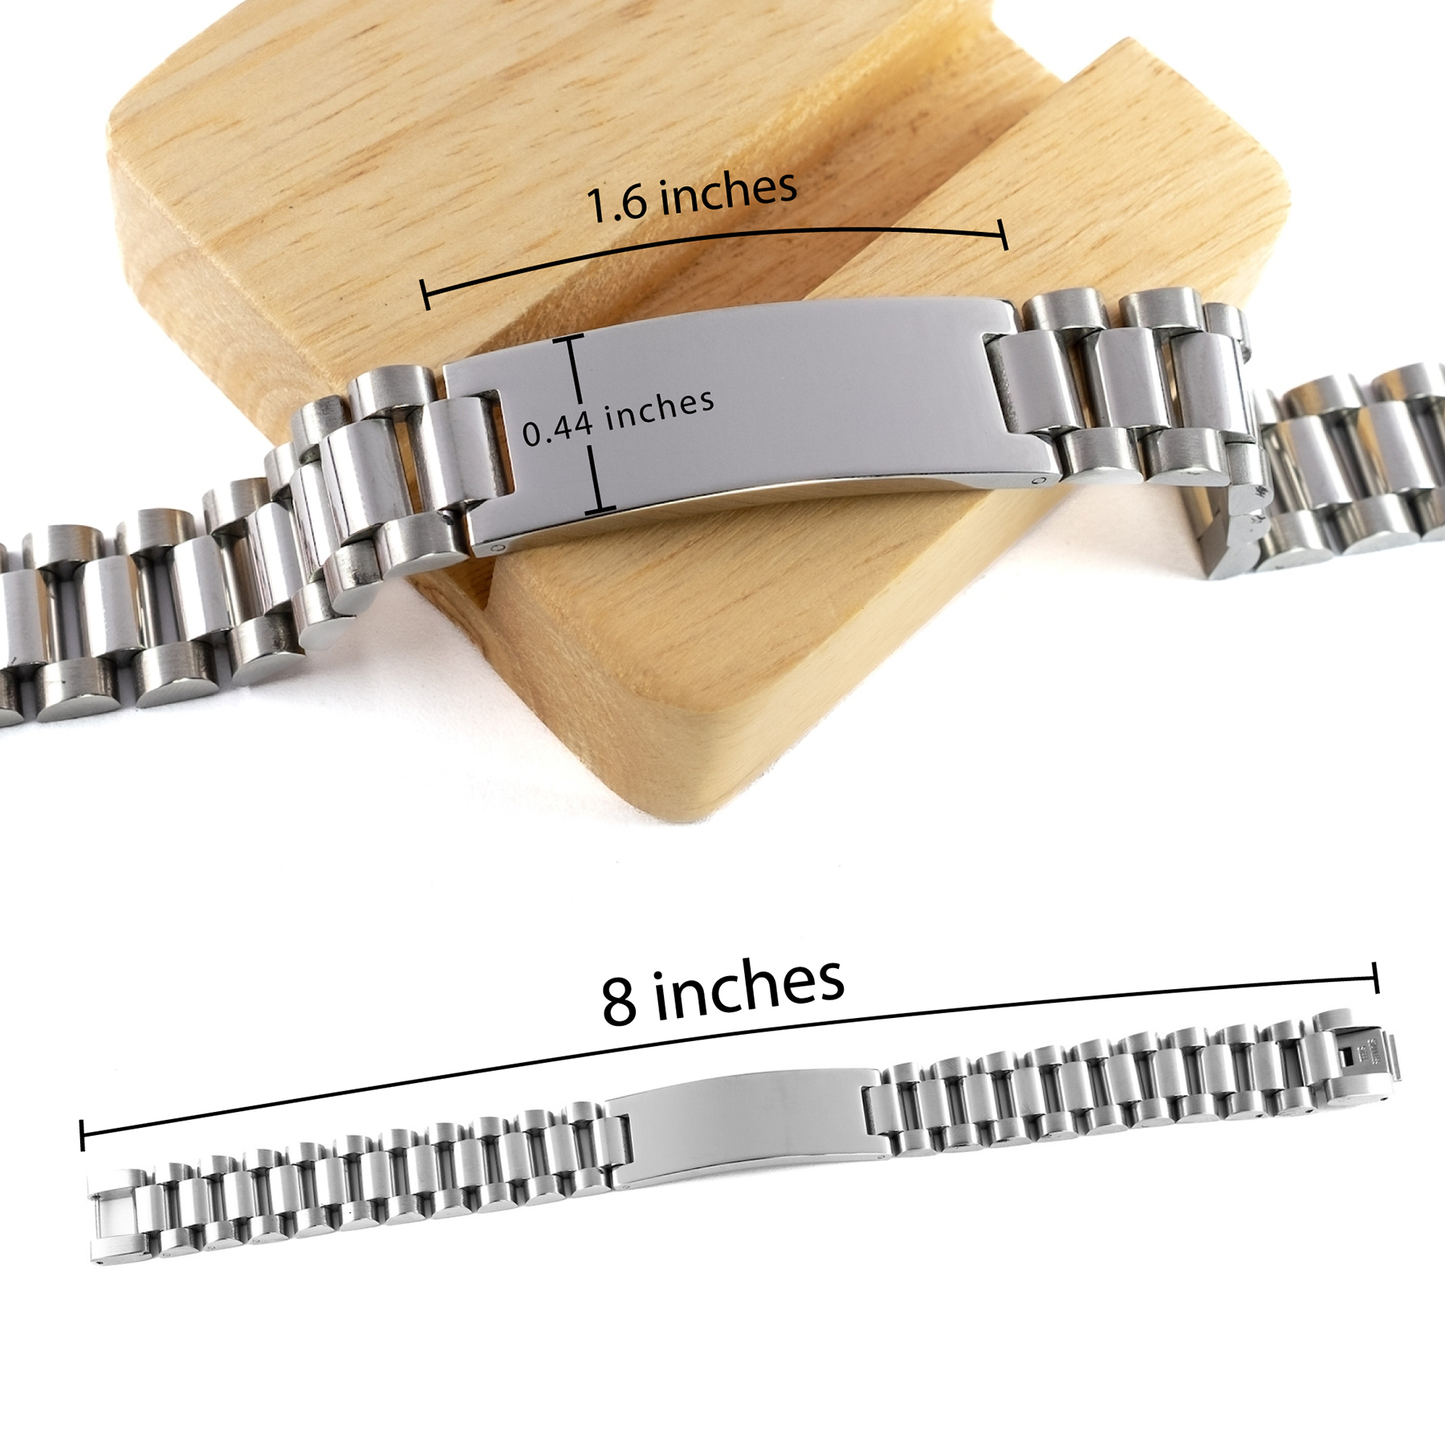 Stepson Motivational Gifts from Bonus Mom, Remember to never give up no matter what, Inspirational Birthday Ladder Stainless Steel Bracelet for Stepson